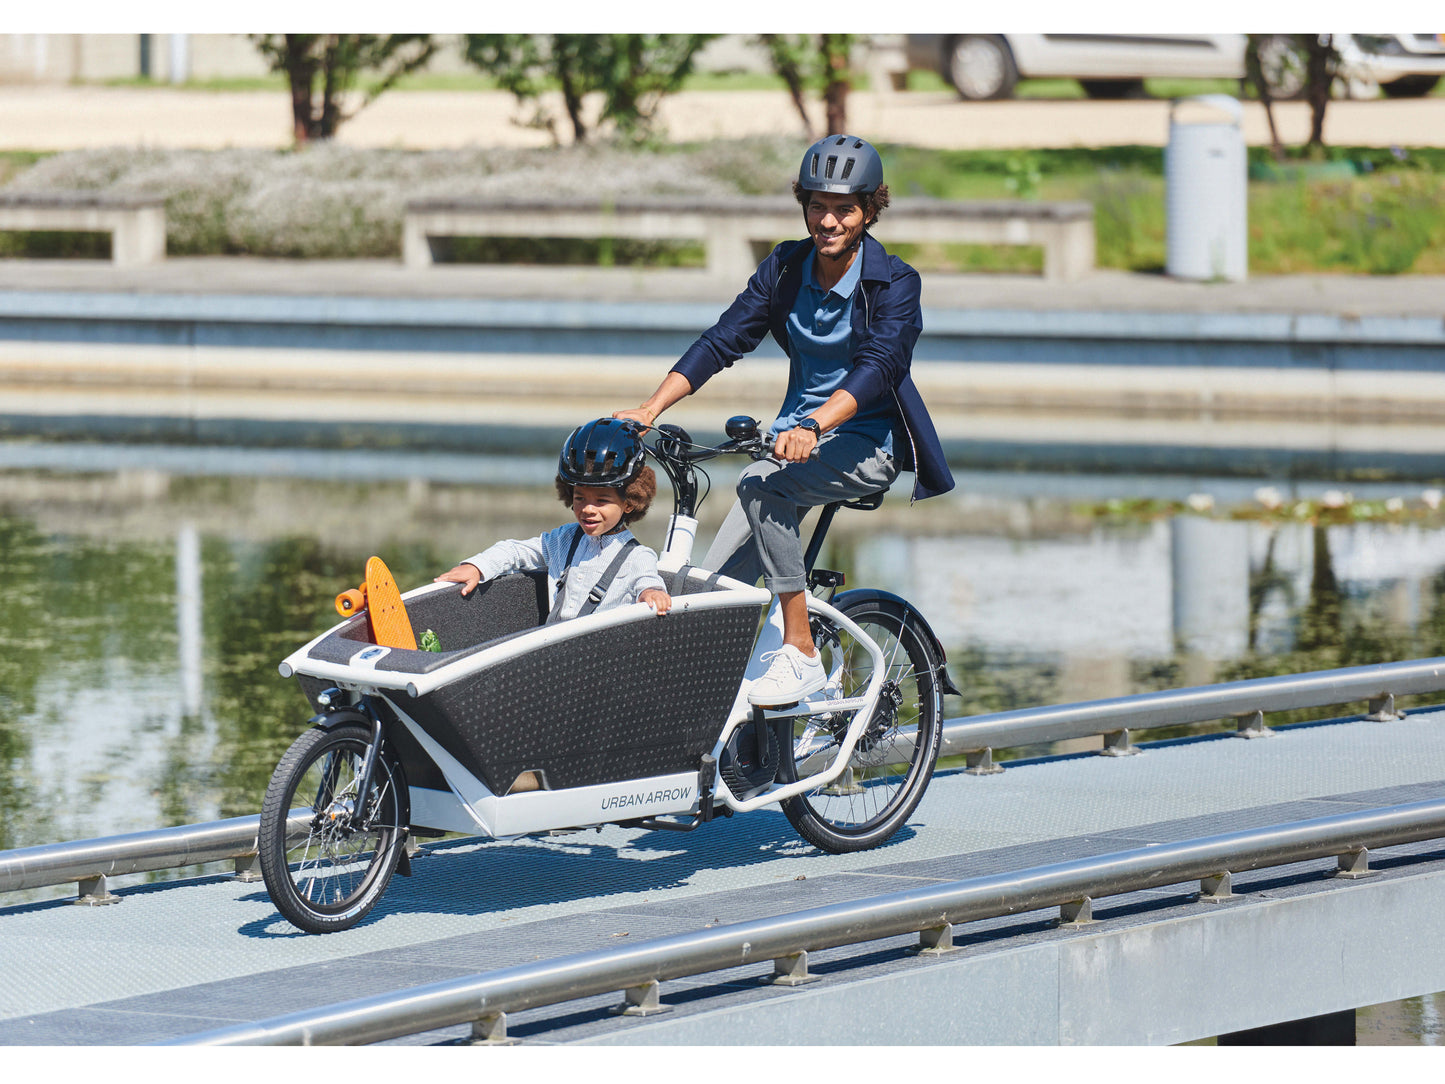 Urban Arrow Family Cargo electric bike man riding city path with child in front